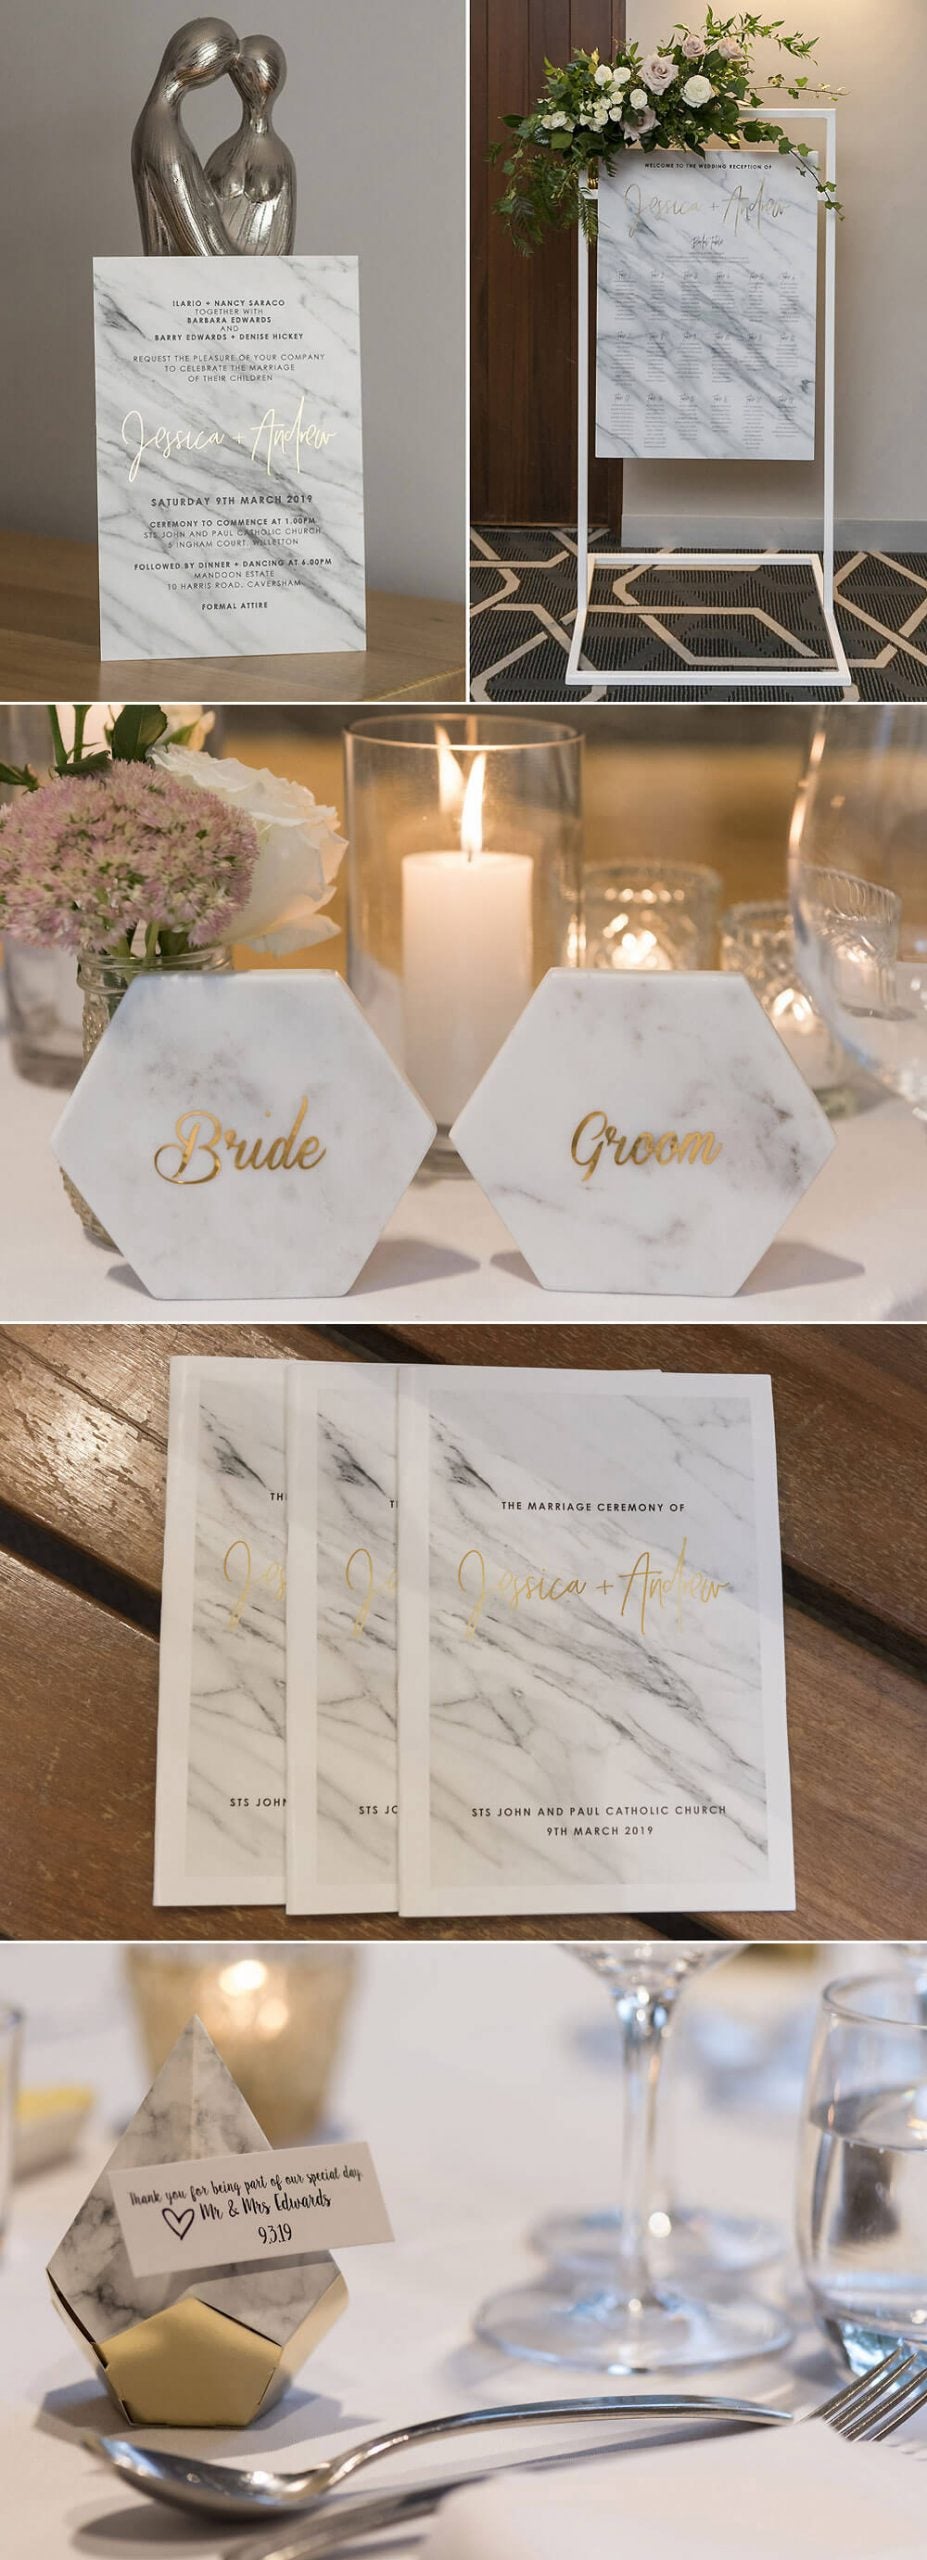 Jessica and Andrew's Wedding Stationery